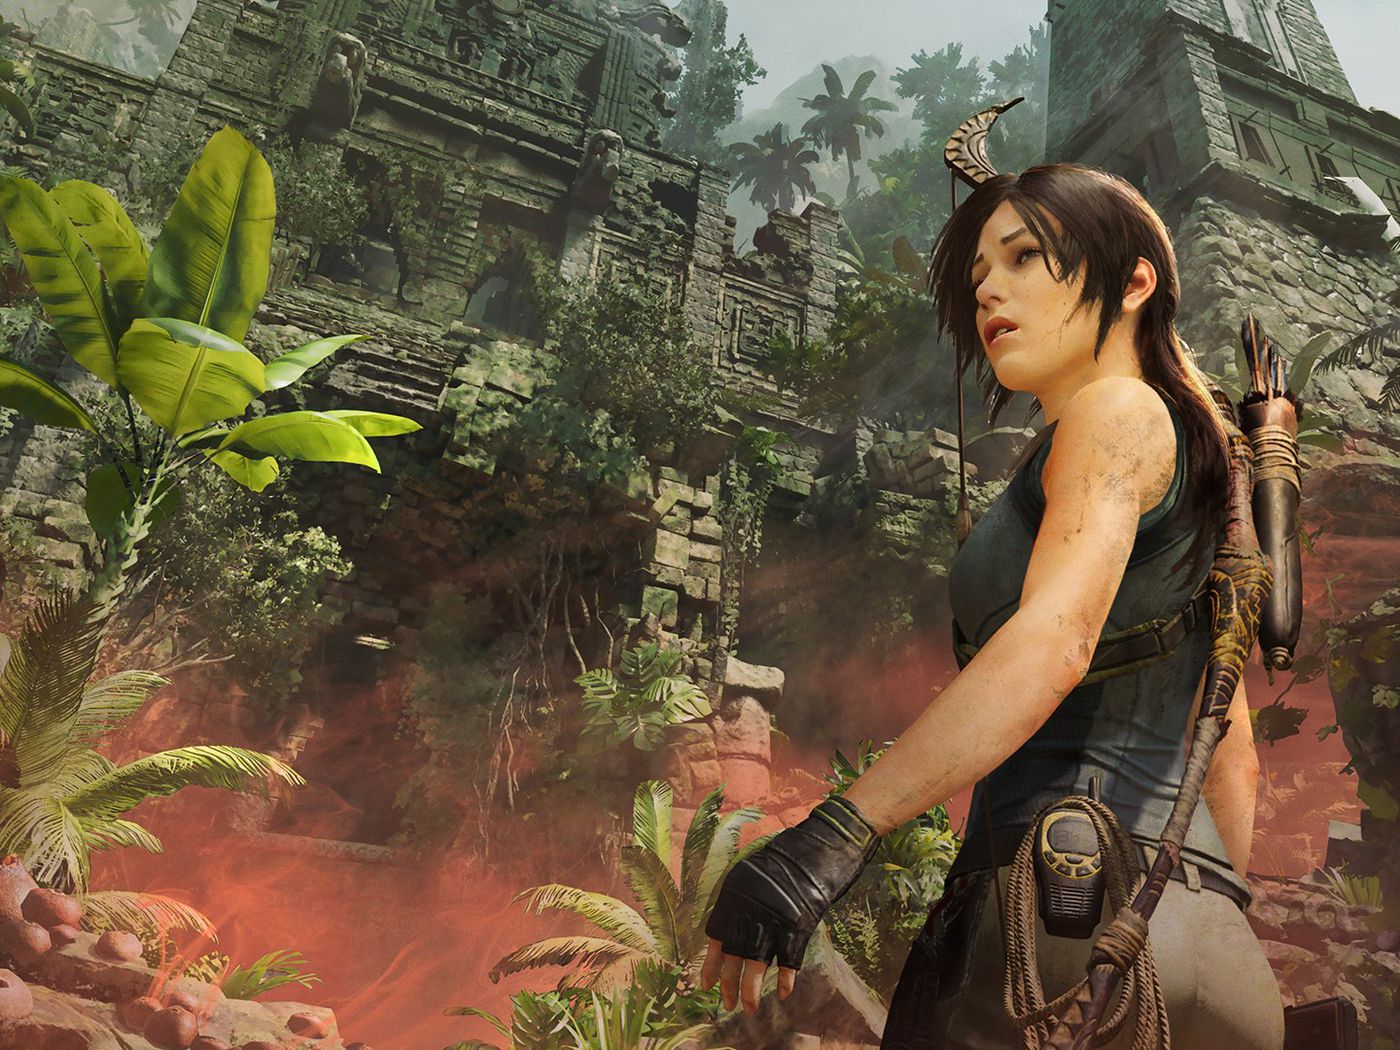 alexander shisler recommends laura croft in trouble pic